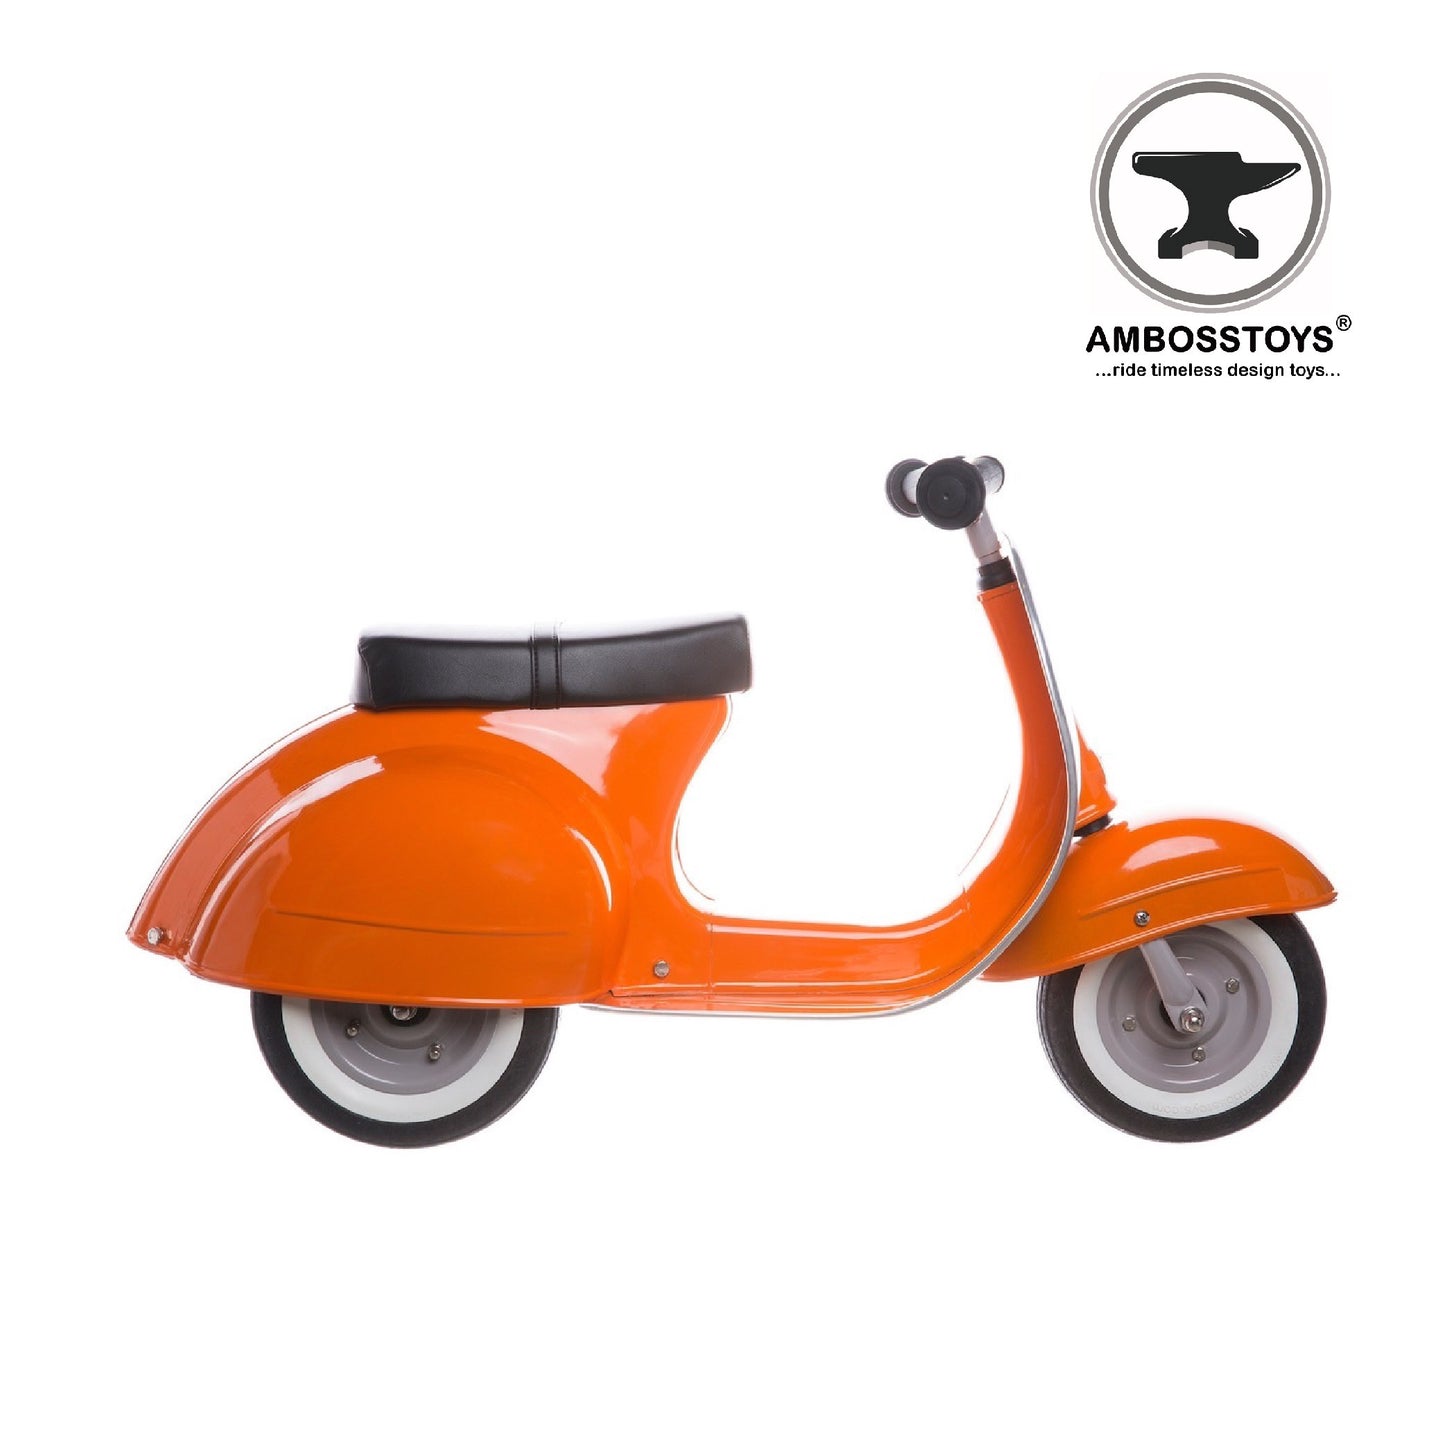 [Ambosstoys] PRIMO classic retro style scooter - 5 colors available